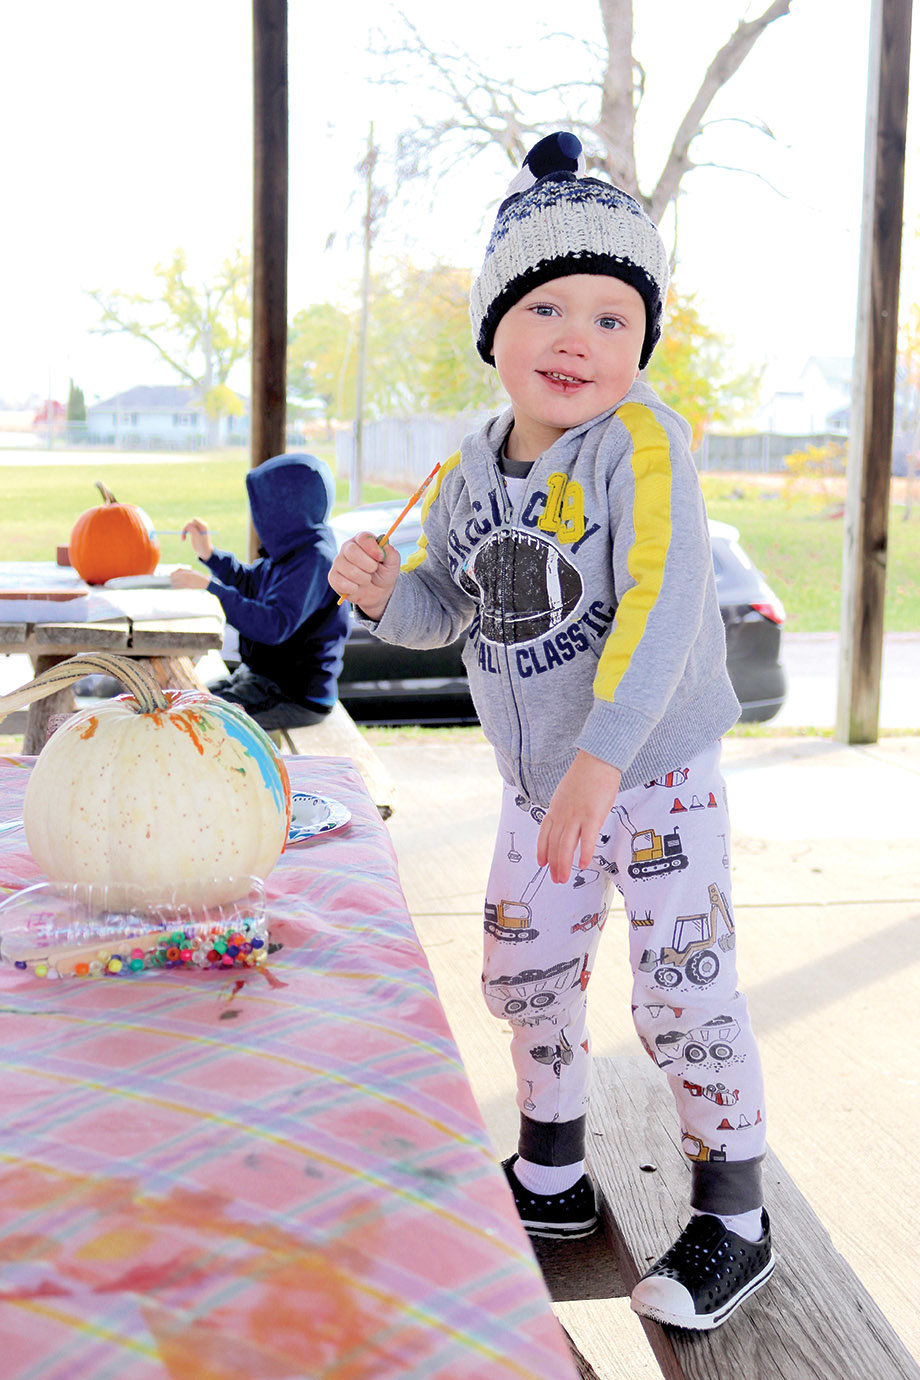 Three-year-old Flynn Snyder decorates his pumpkin Thursday with family and friends. The tyke was excited to be at Linden's Bulldog Park for pumpkin painting through the event sponsored by the Linden Library, saying "it's cold" but enjoying the experience nonetheless.